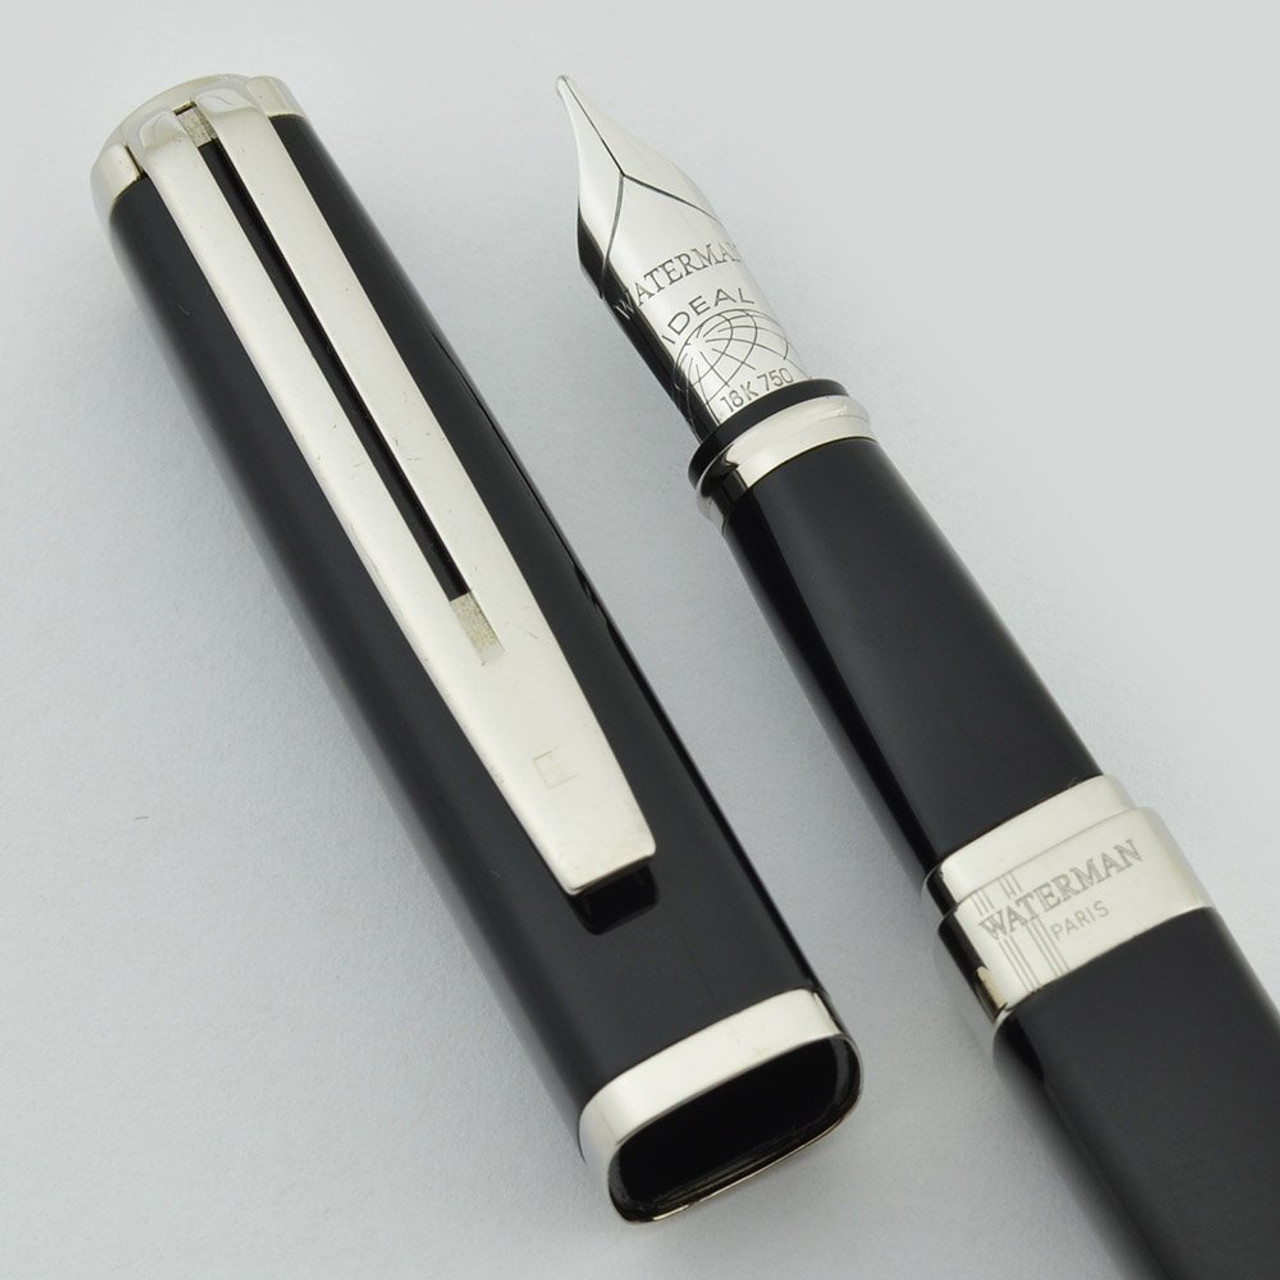 Waterman Exception Slim Fountain Pen - Black Lacquer, Medium 18k Nib (Excellent in Box, Works Well)